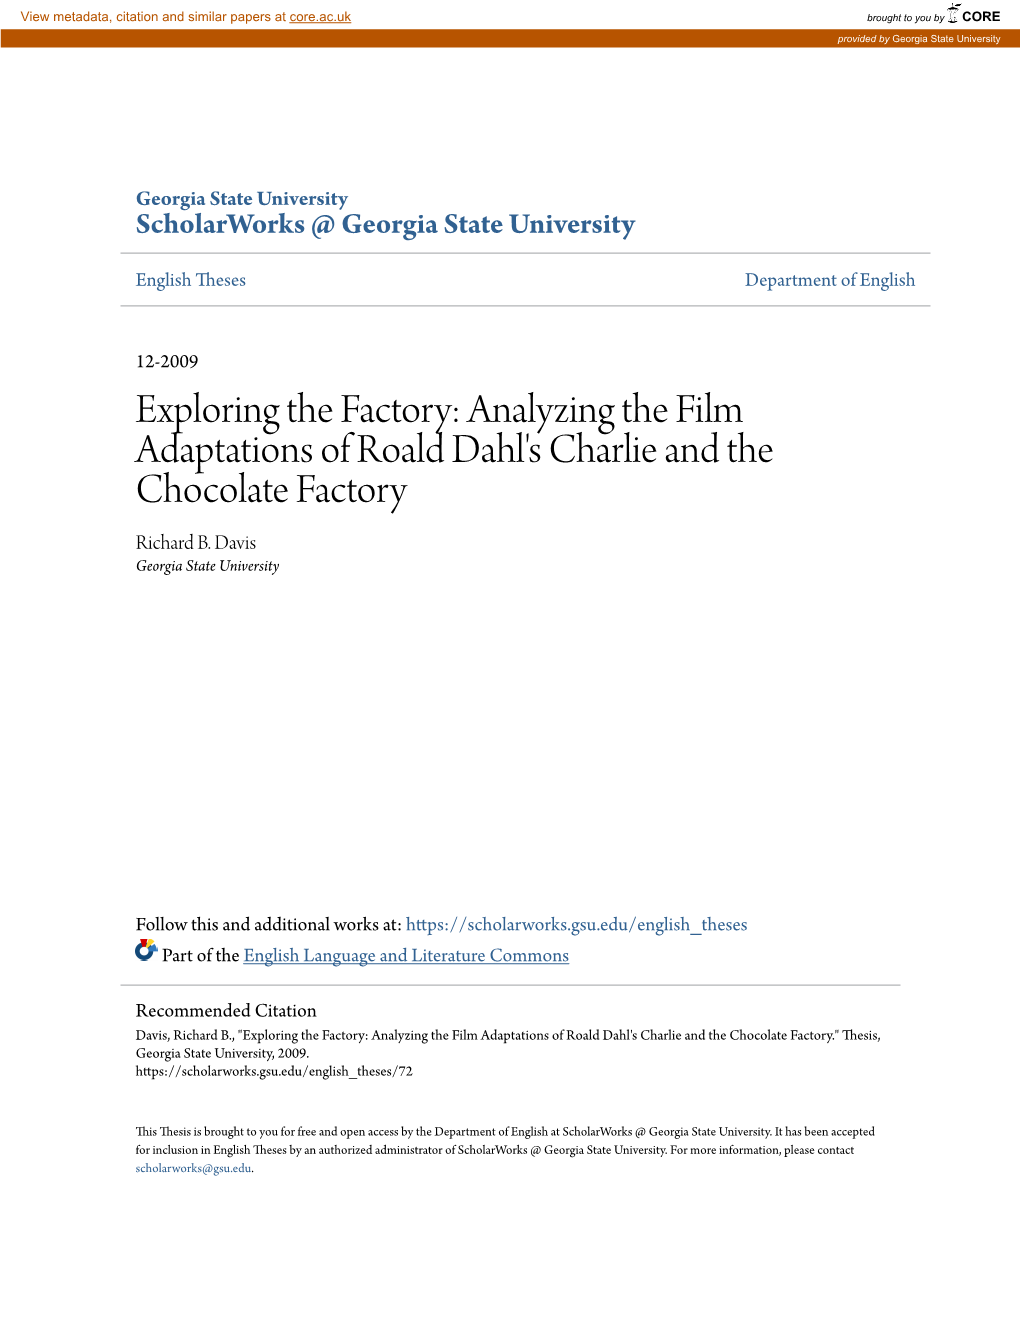 Exploring the Factory: Analyzing the Film Adaptations of Roald Dahl's Charlie and the Chocolate Factory Richard B